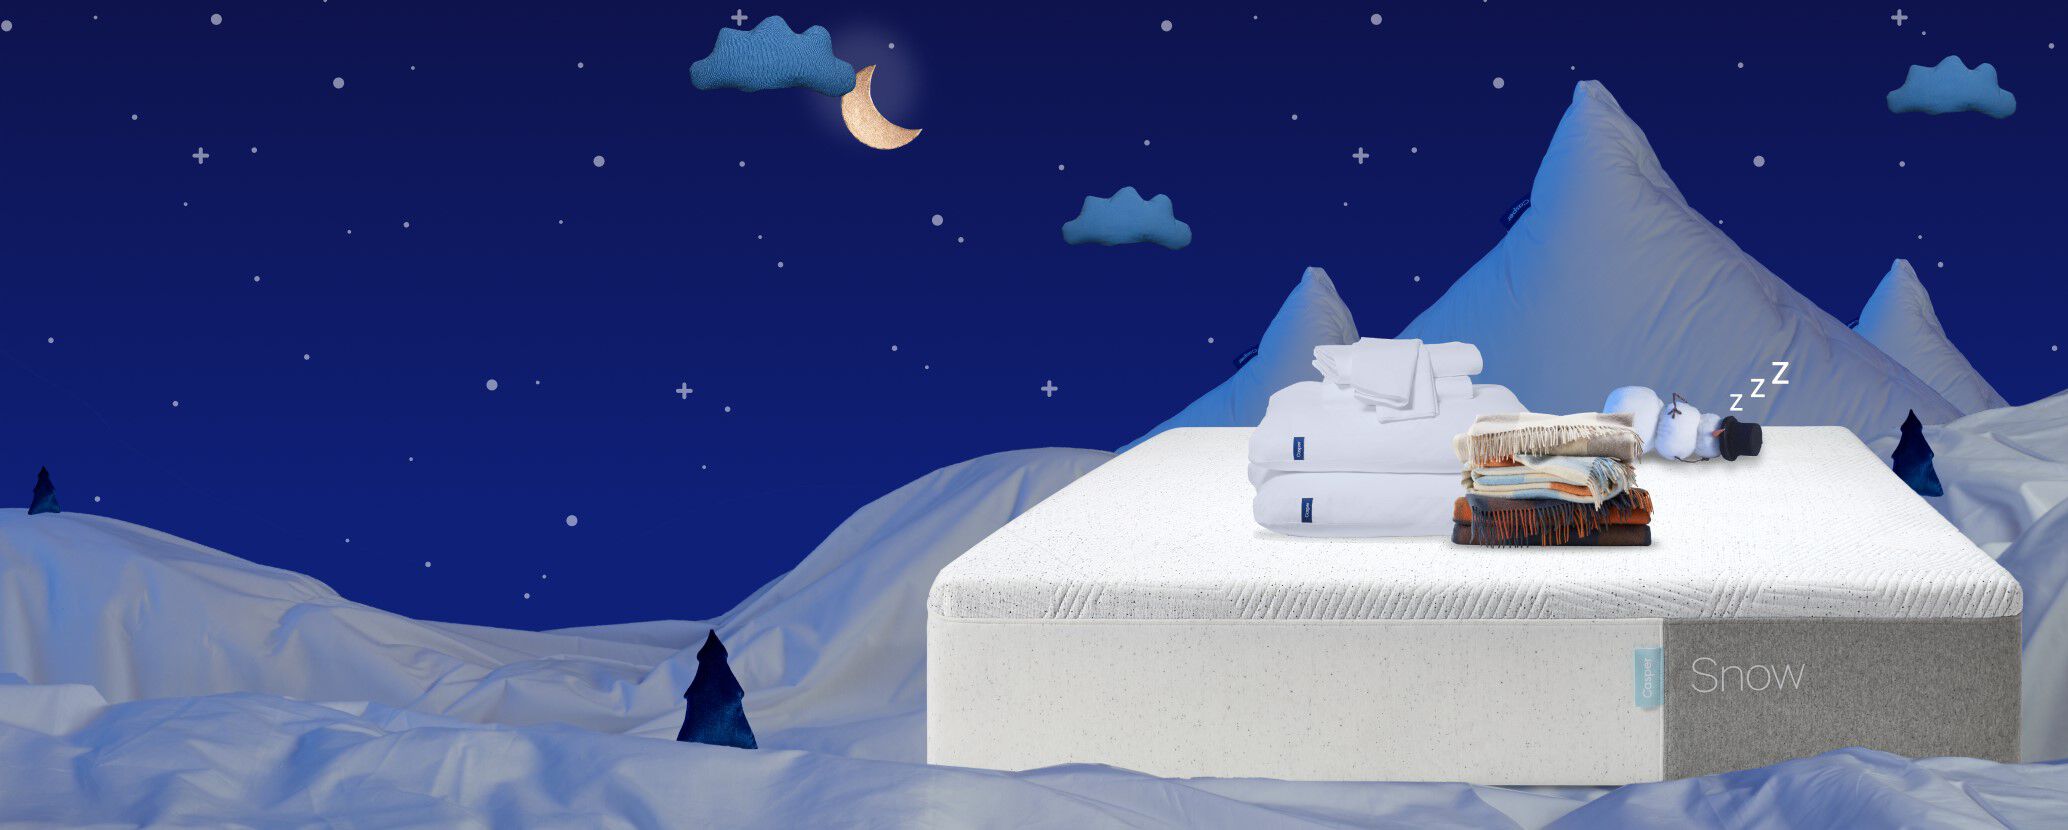 Blue Label Firm Pillow  Featured At Many Choice® Hotel Family of Bran 